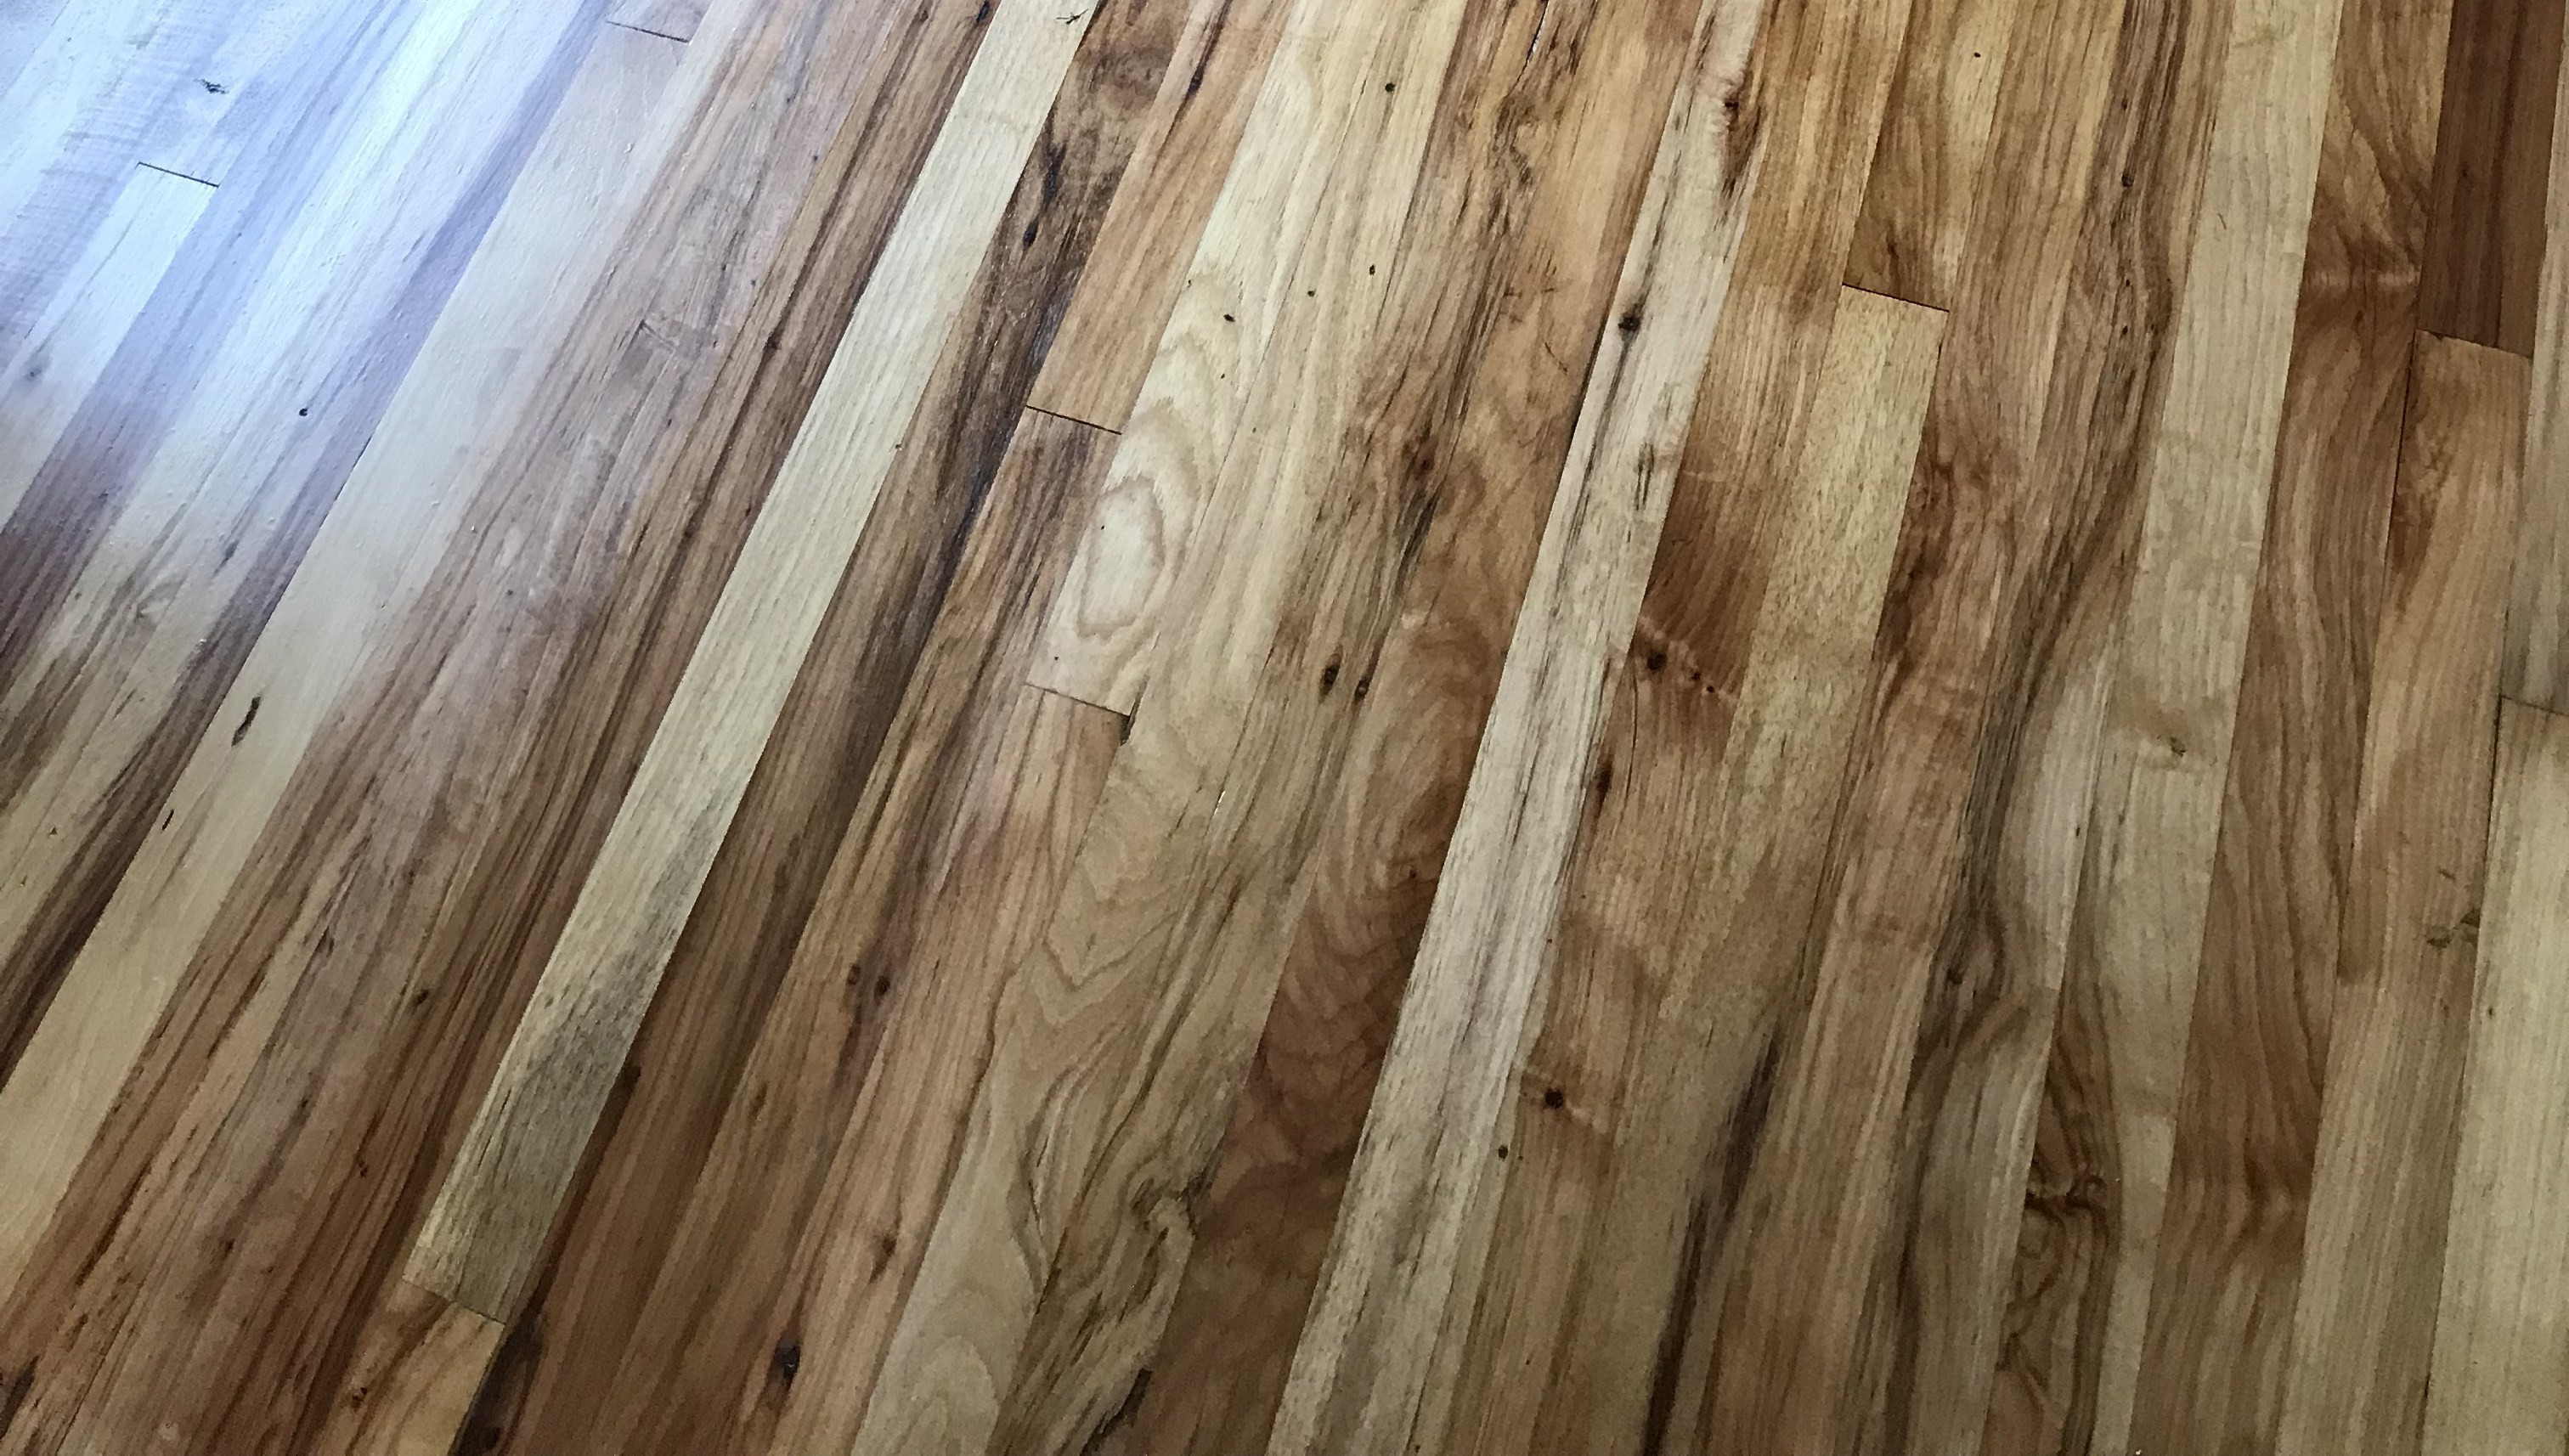 16 Awesome Cost to Sand and Stain Hardwood Floors 2022 free download cost to sand and stain hardwood floors of refinishing hardwood floors carlhaven made within refinishing hardwood floors